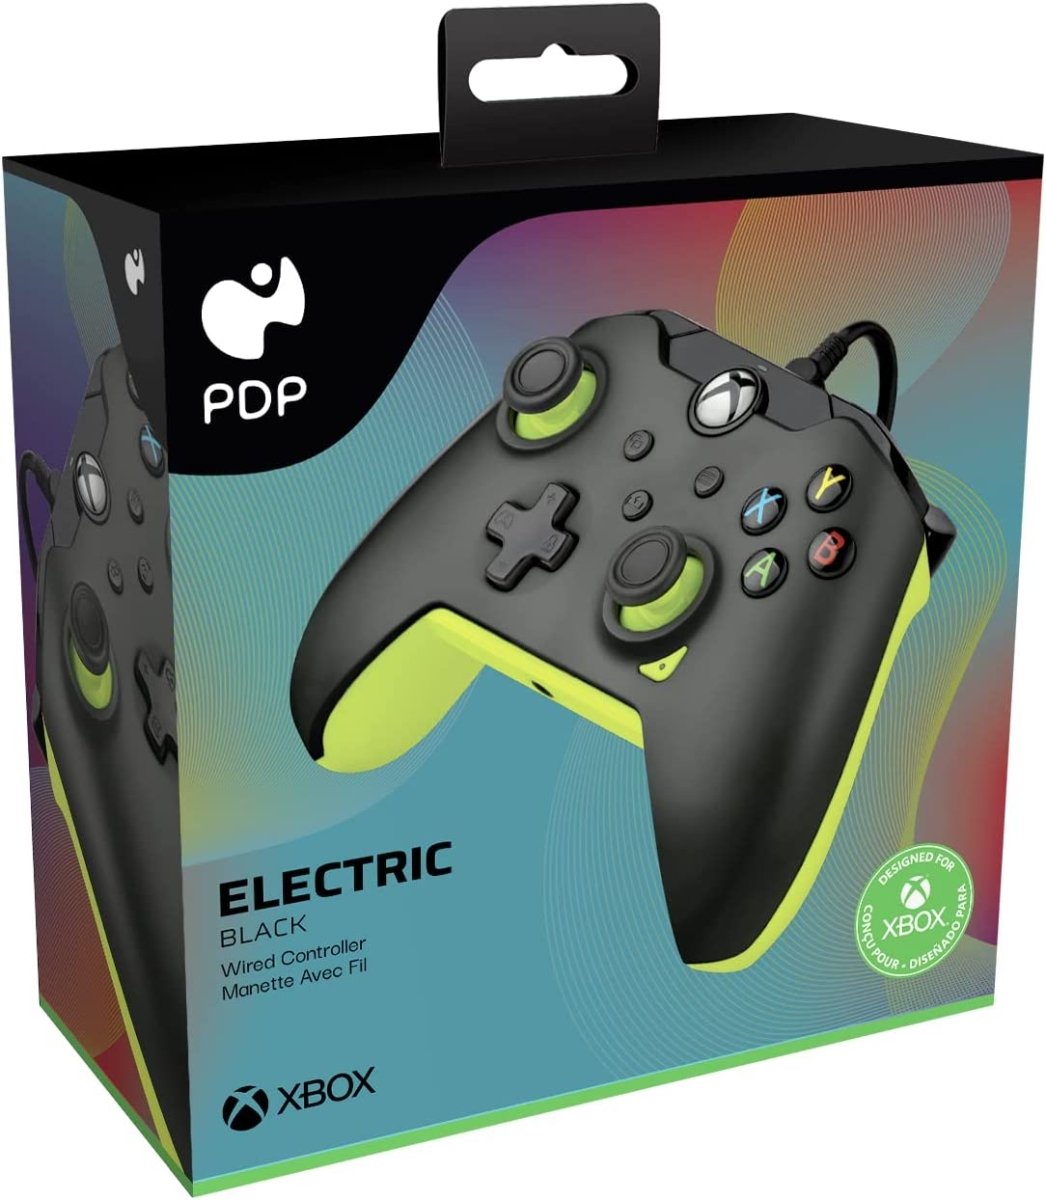 PDP Electric Black Wired Controller for Xbox - GameOn.games